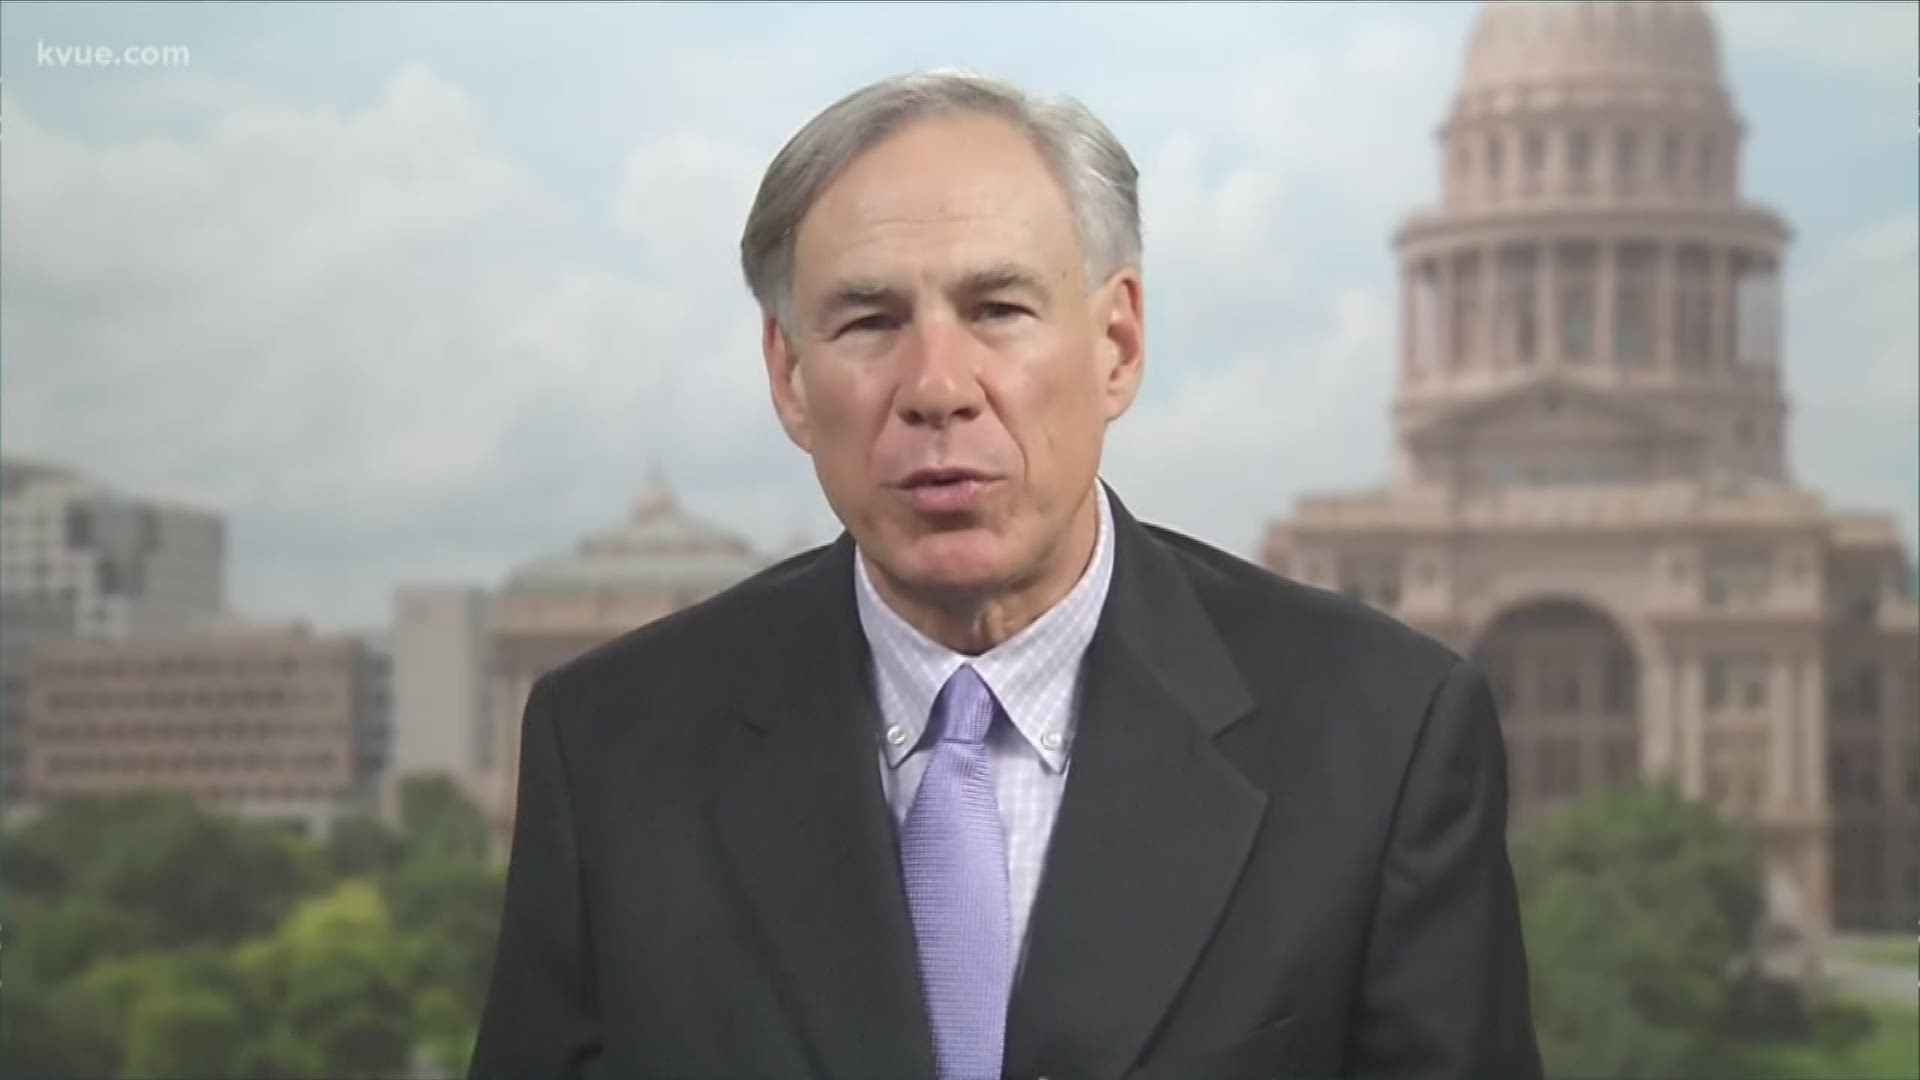 Gov. Greg Abbott joins us live to answer your questions about the state's response to the coronavirus.